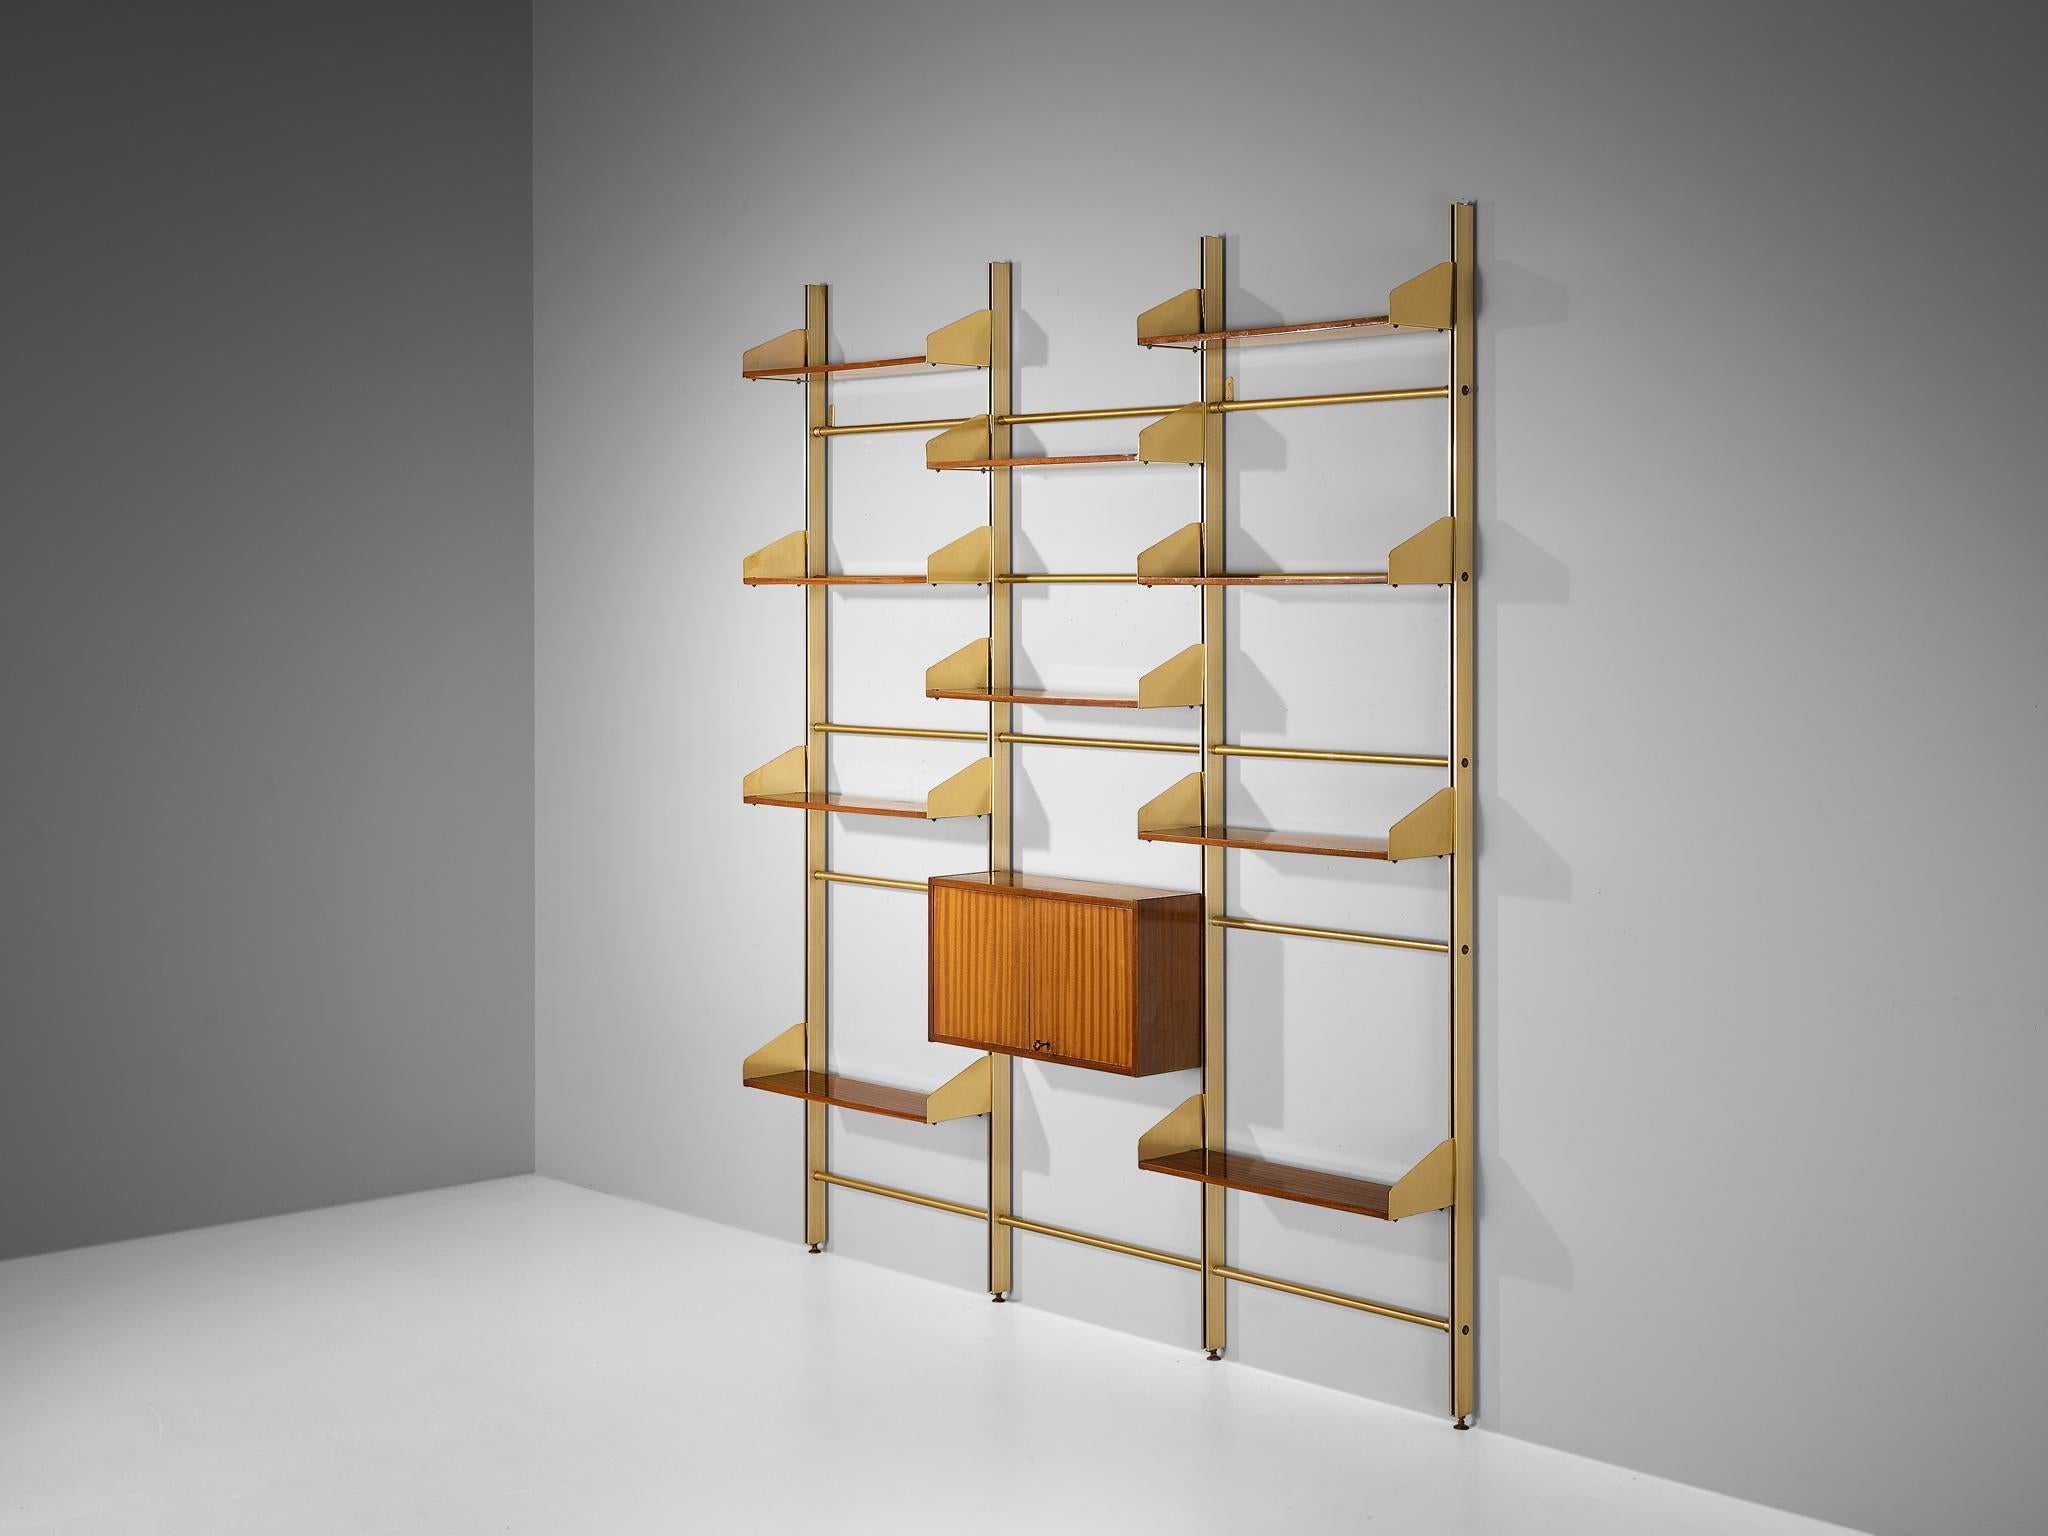 Feal (Fonderie Elettriche Alluminio e Lega), model ‘S2’ wall units, mahogany, anodized aluminum, Italy, 1950s 

Both aesthetics and functionality comes into play in this bookcase shelf; elegant in line and practical to use for any environment. This